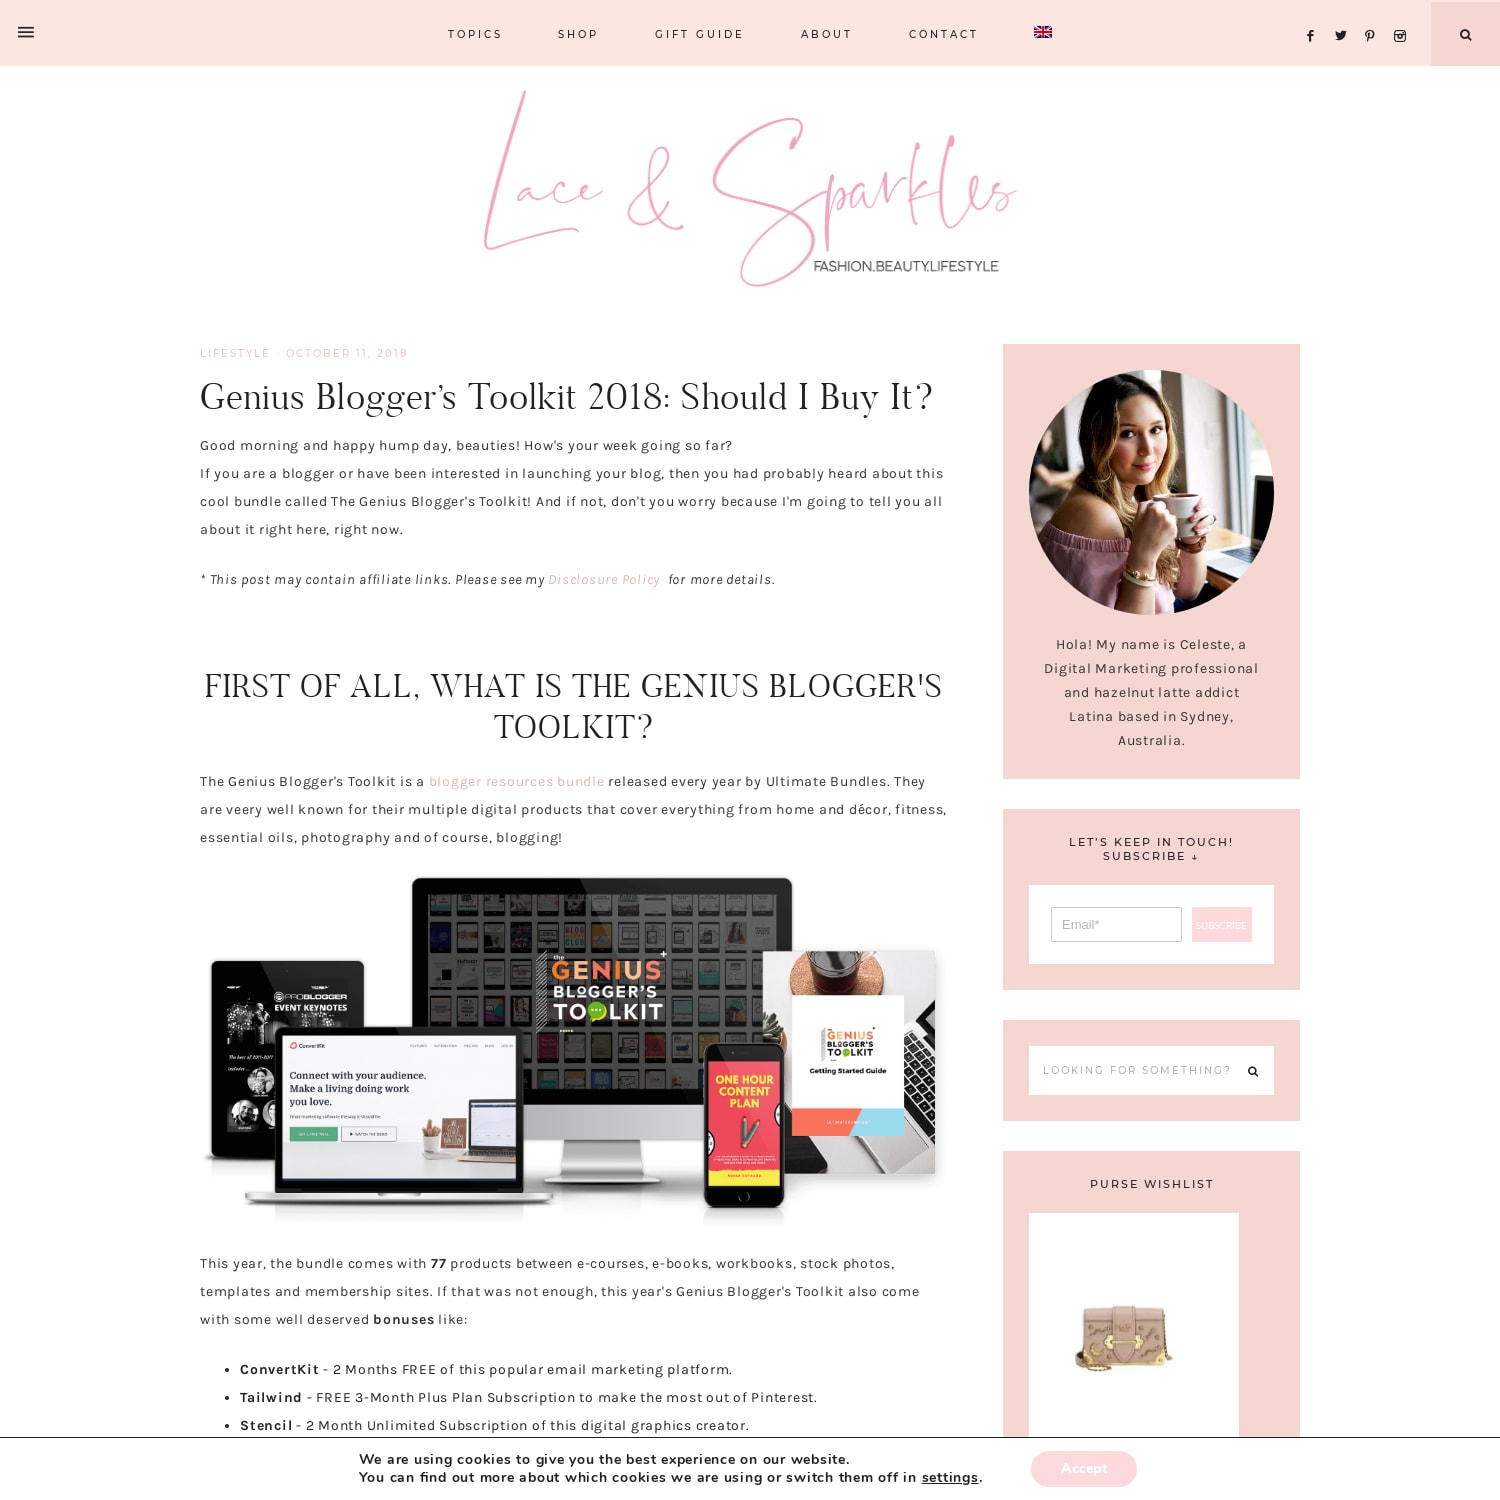 Genius Blogger's Toolkit 2018: Should I Buy It? - Lace & Sparkles